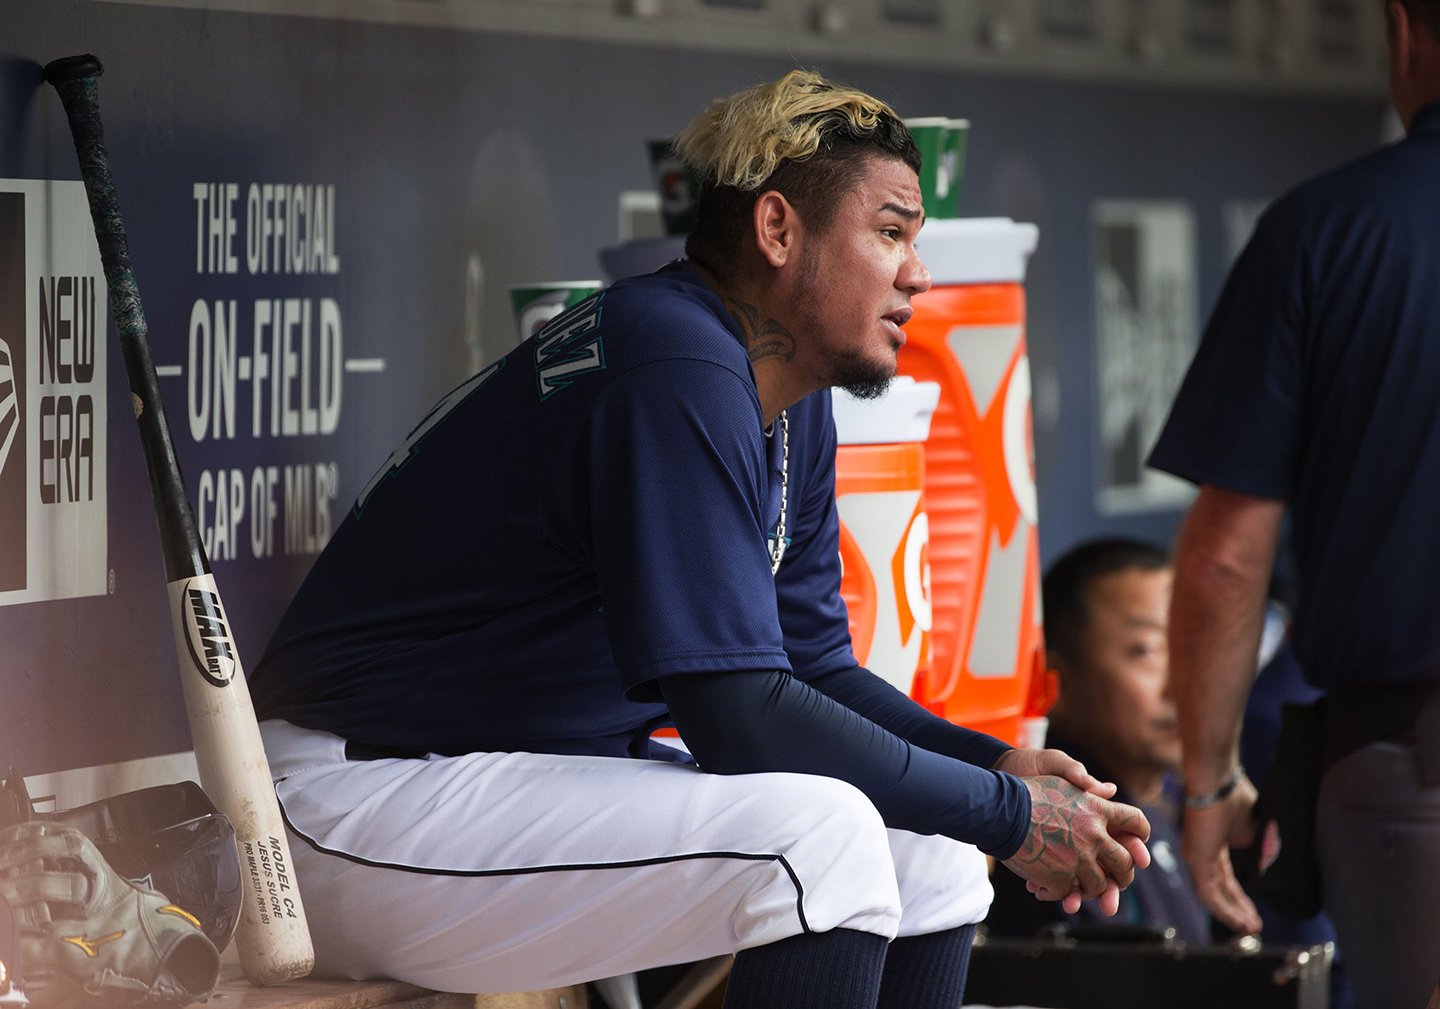 Felix Hernandez comes into Spring Training motivated, ready to go